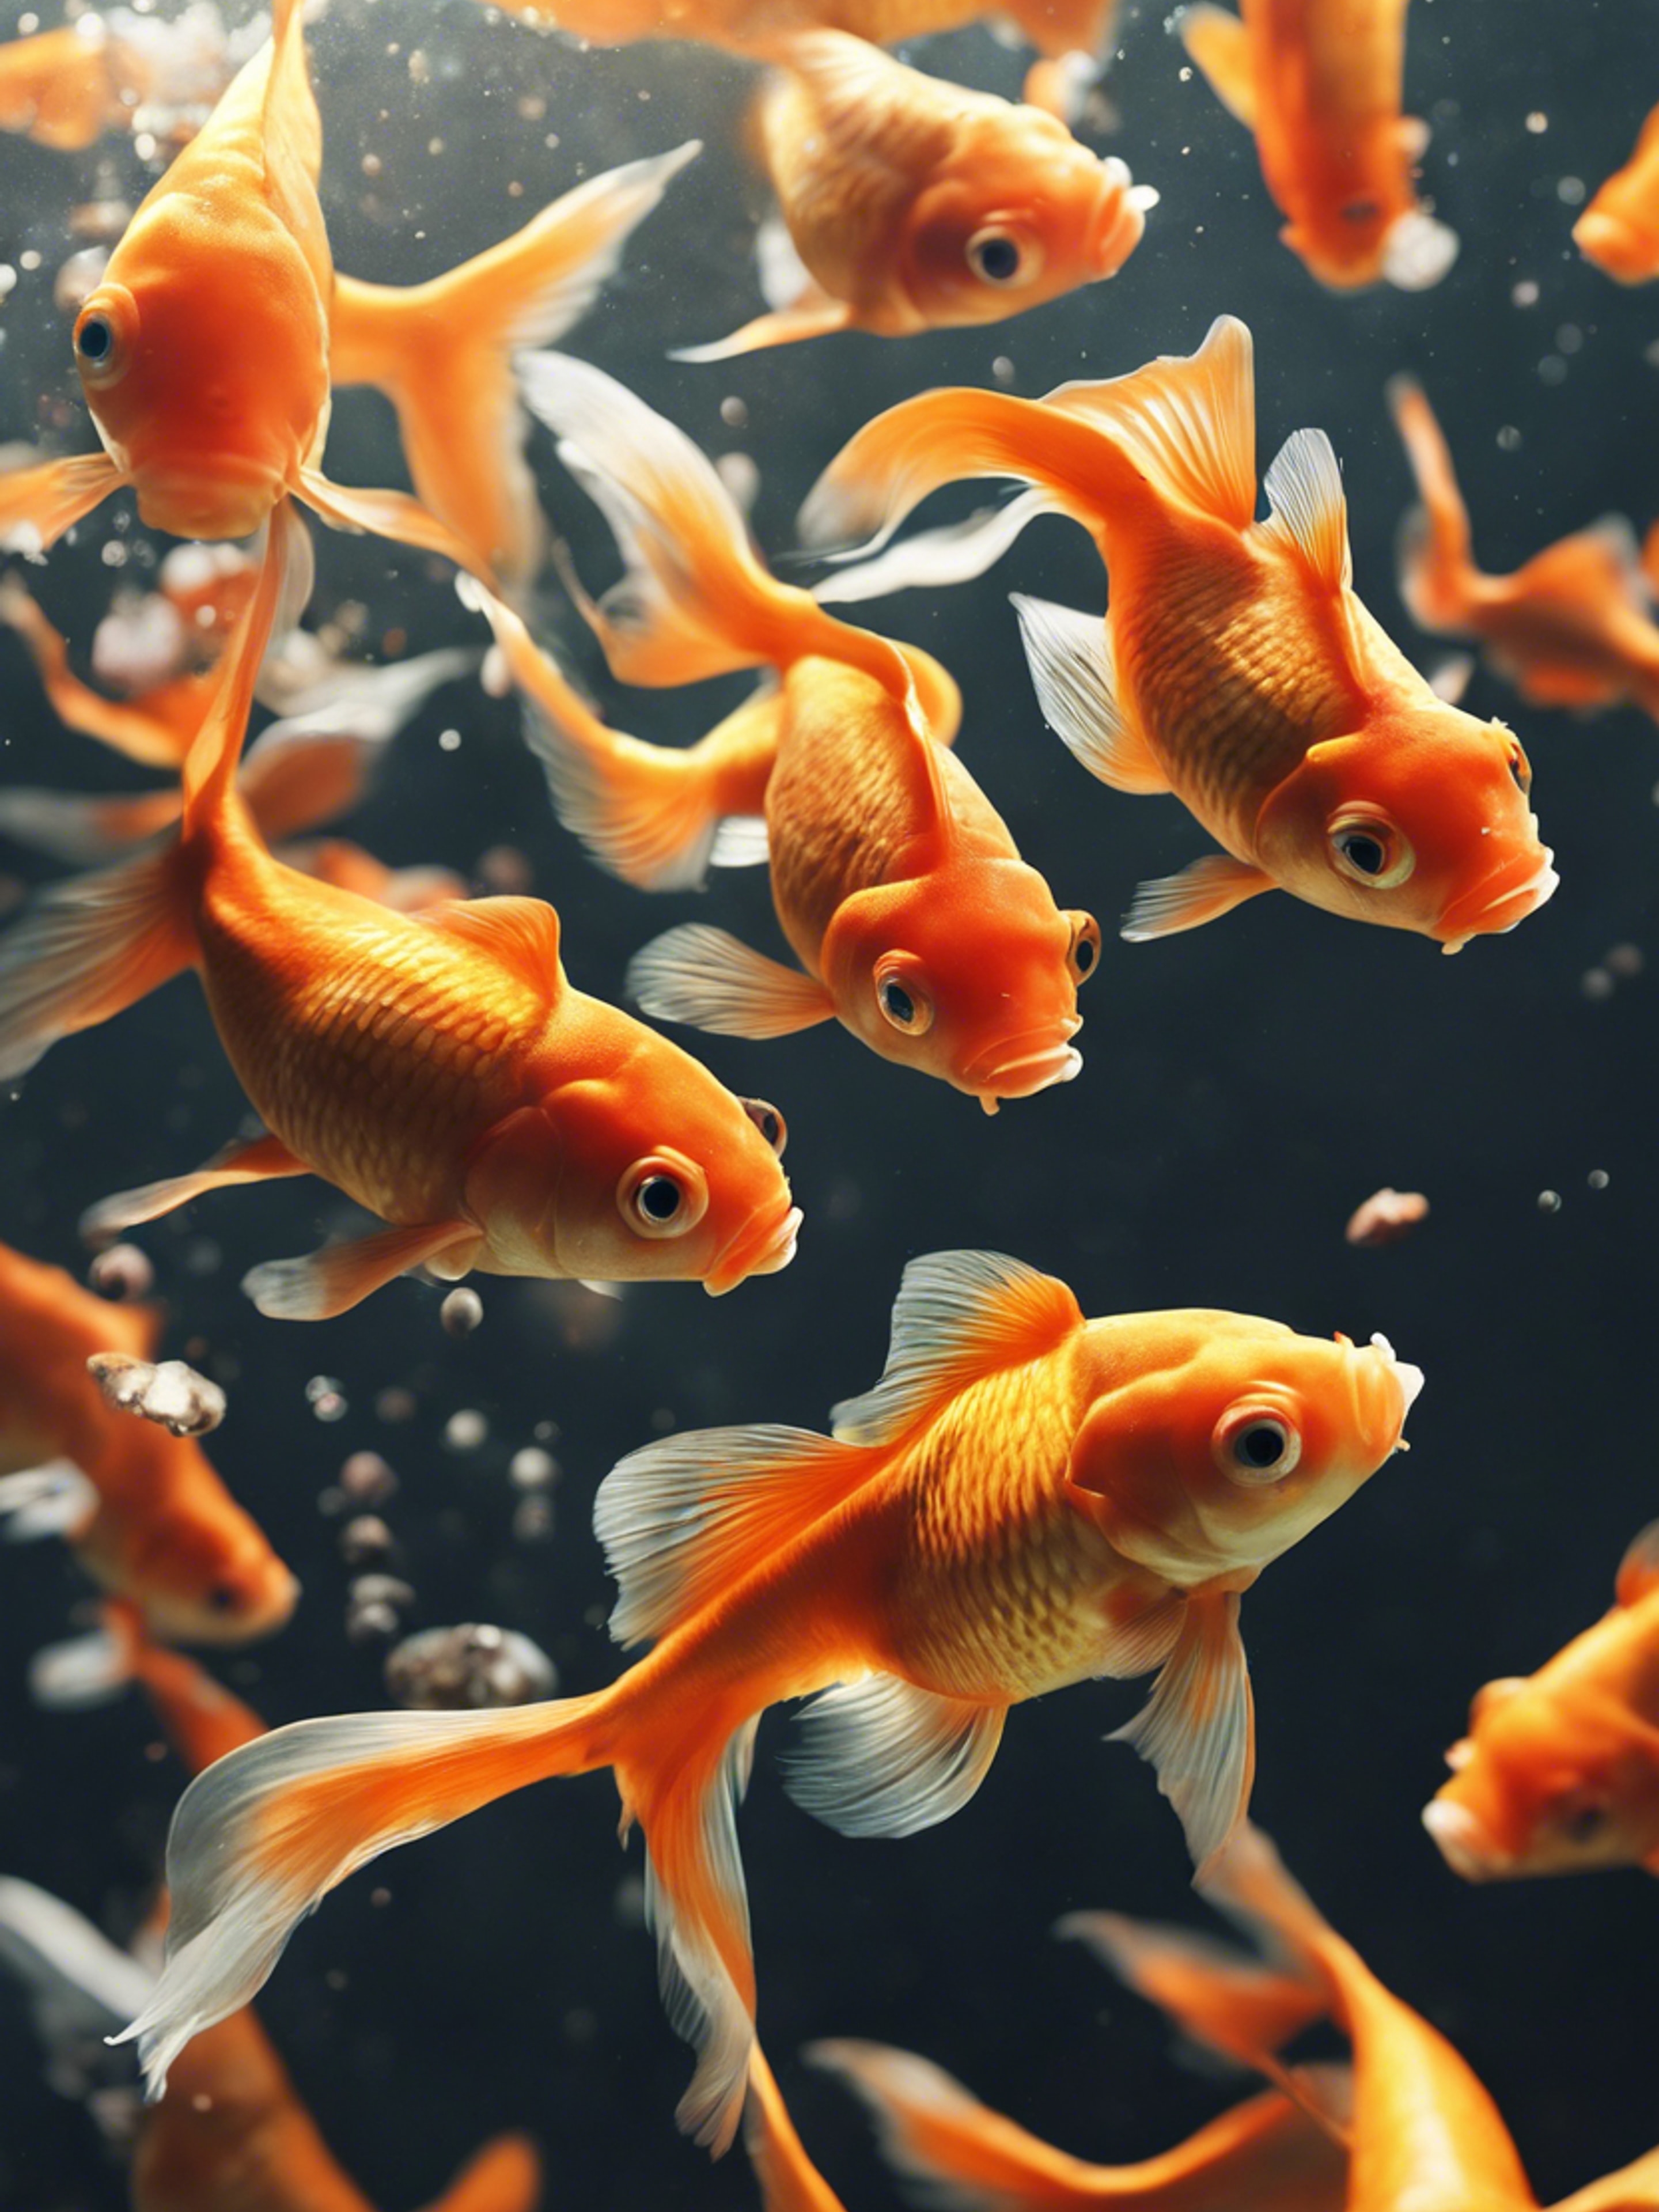 A group of goldfish gathered together feeding on floating fish food in a pond. ផ្ទាំង​រូបភាព[884d4a7ab78e48ae91a0]